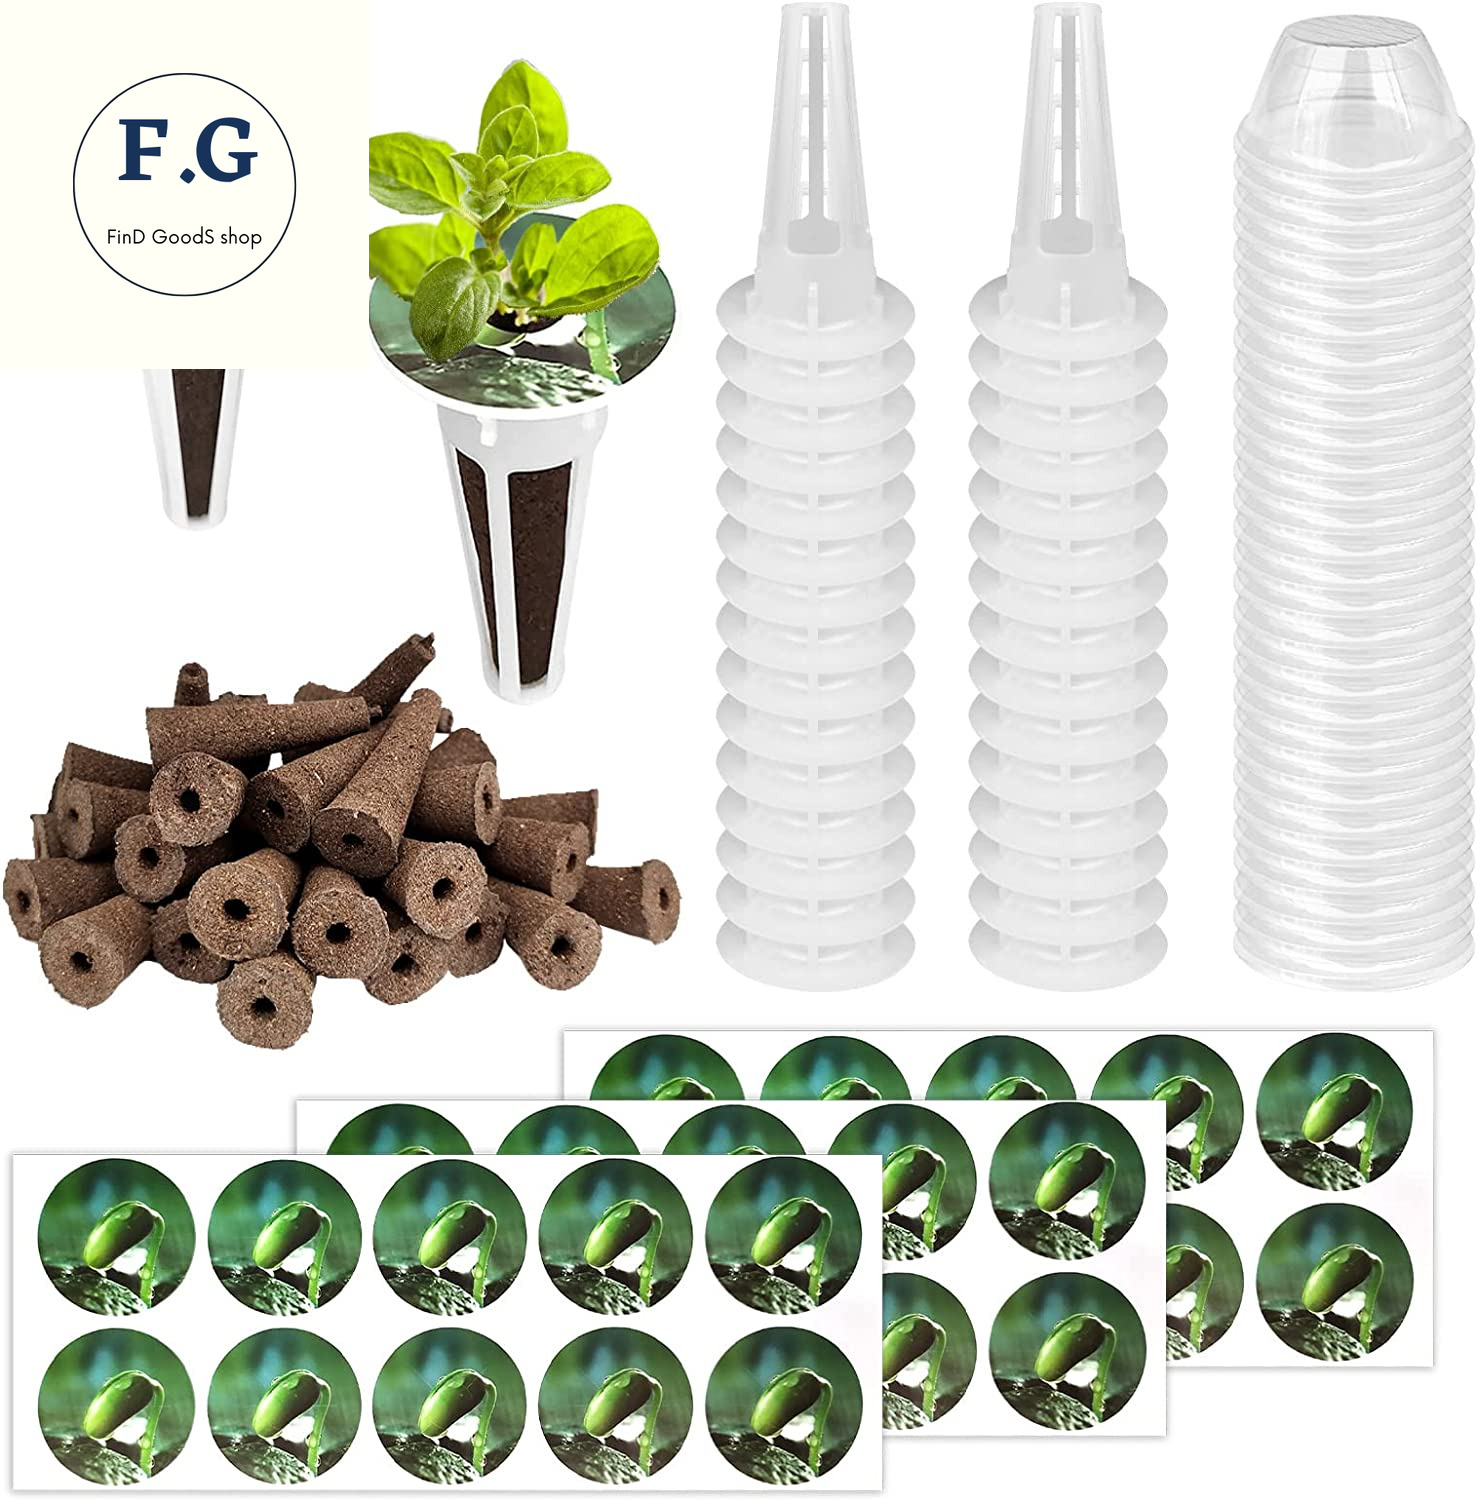 120 Pcs Seed Pods Kit Compatible with Aerogarden Hydroponics Garden Accessori...